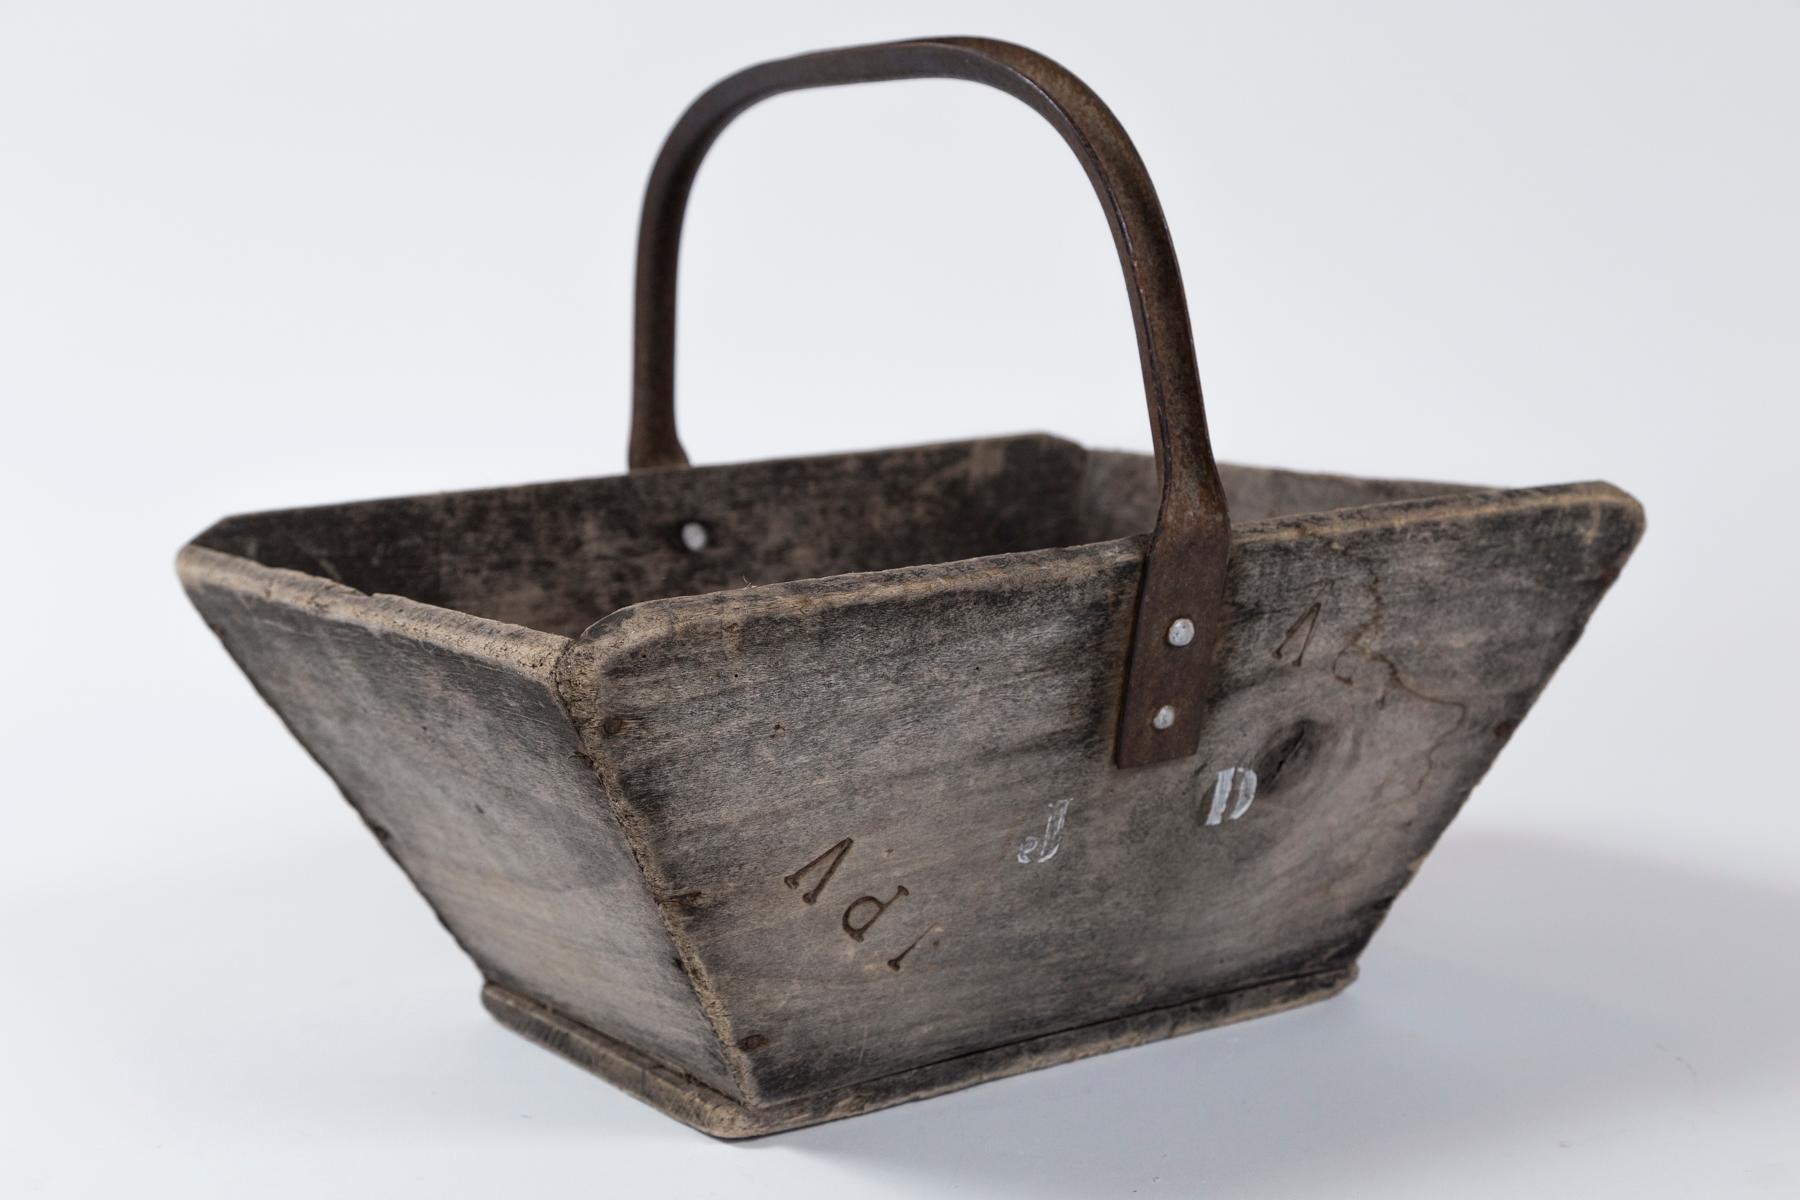 Antique French Garden Trug (Panier), early 20th Century. Hand-crafted wood gathering basket with iron handle. Stenciled initials 'JD'. Impressed initials 'JPV'.